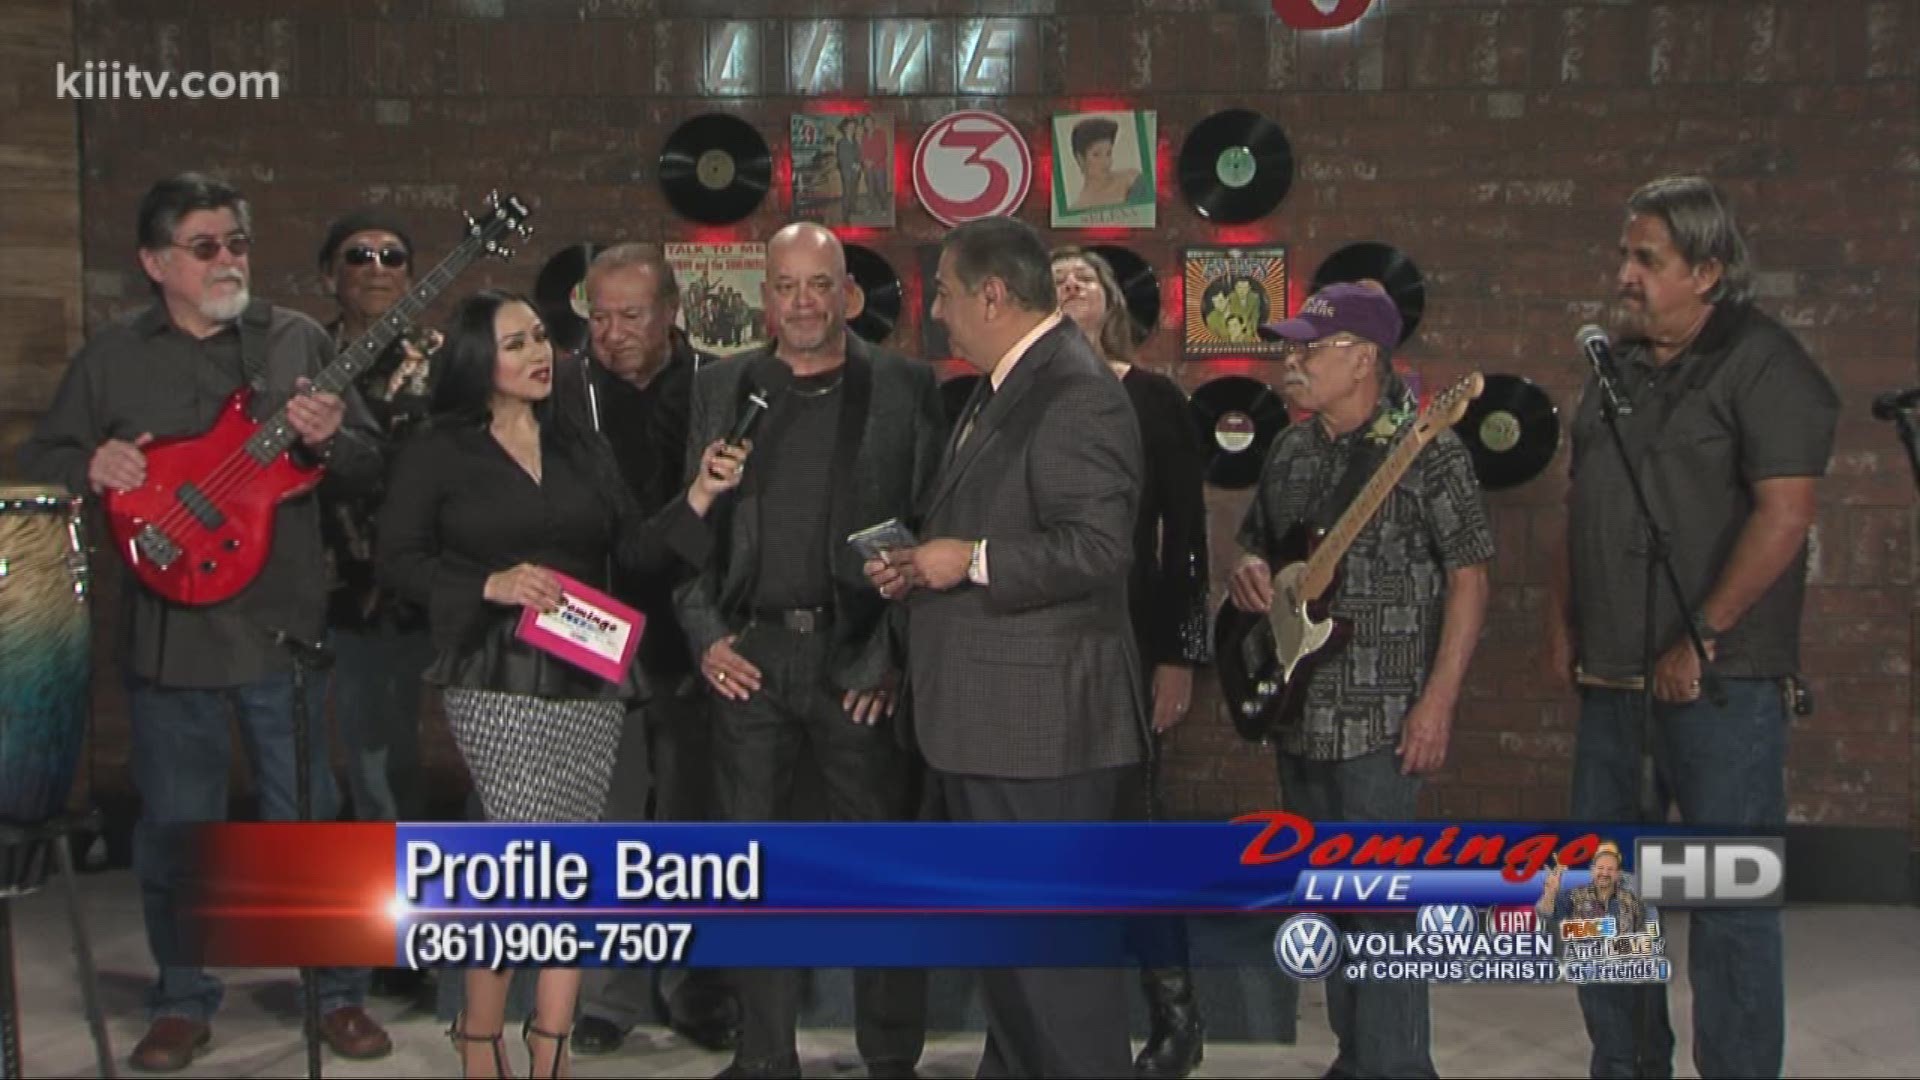 Profile Band Interviewing with Barbi Leo and Rudy Trevino on Domingo Live!